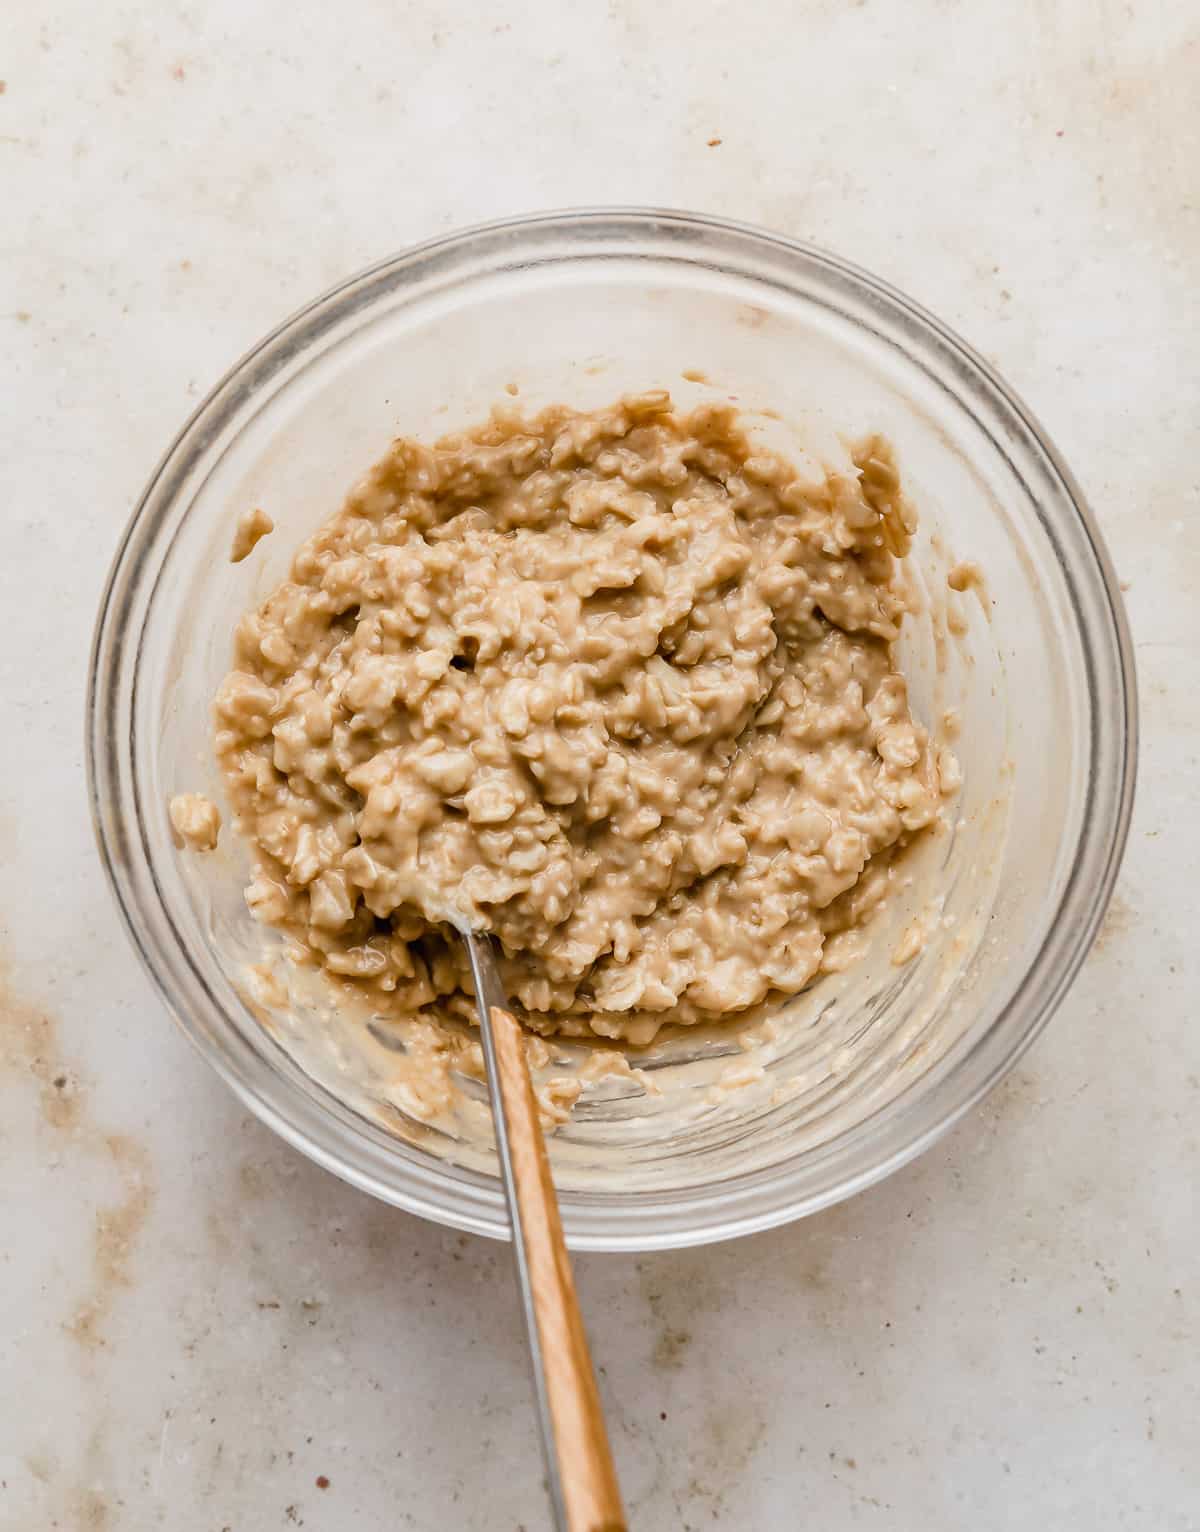 A glass bowl with tan colored peanut butter oatmeal in it.